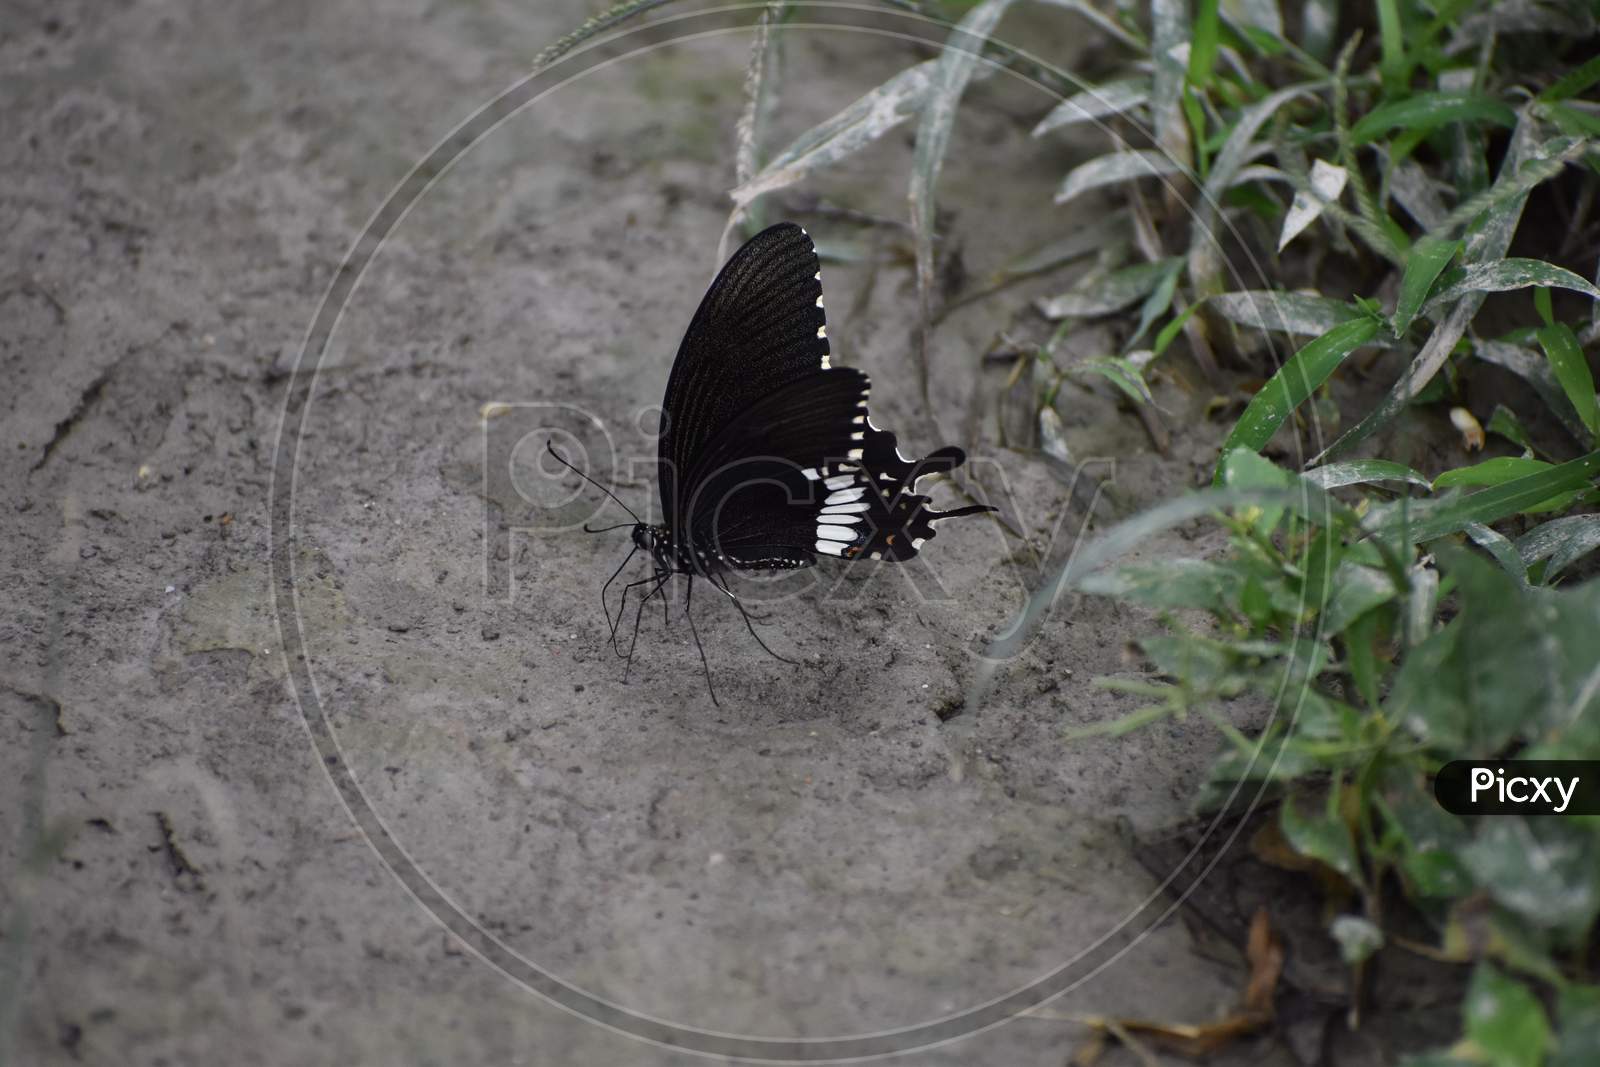 a black butterfly on the ground